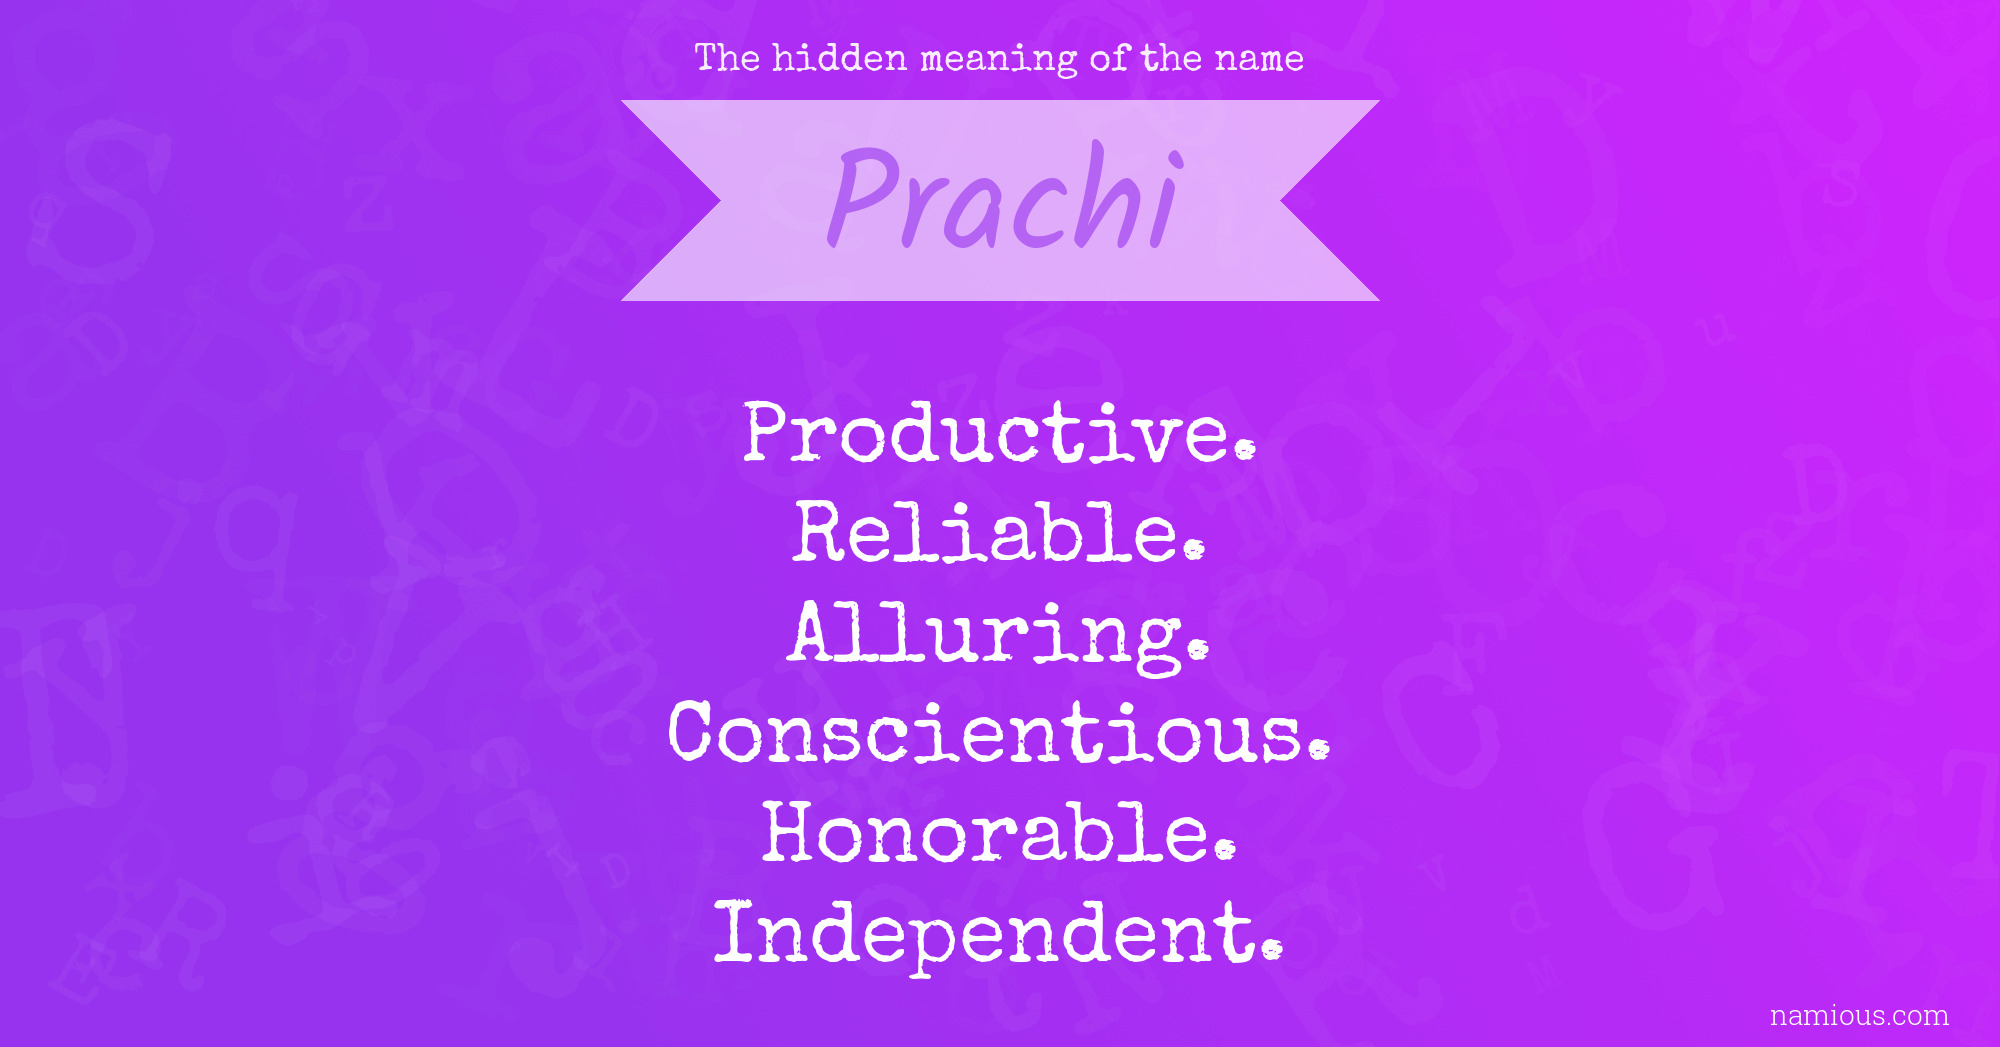 The hidden meaning of the name Prachi